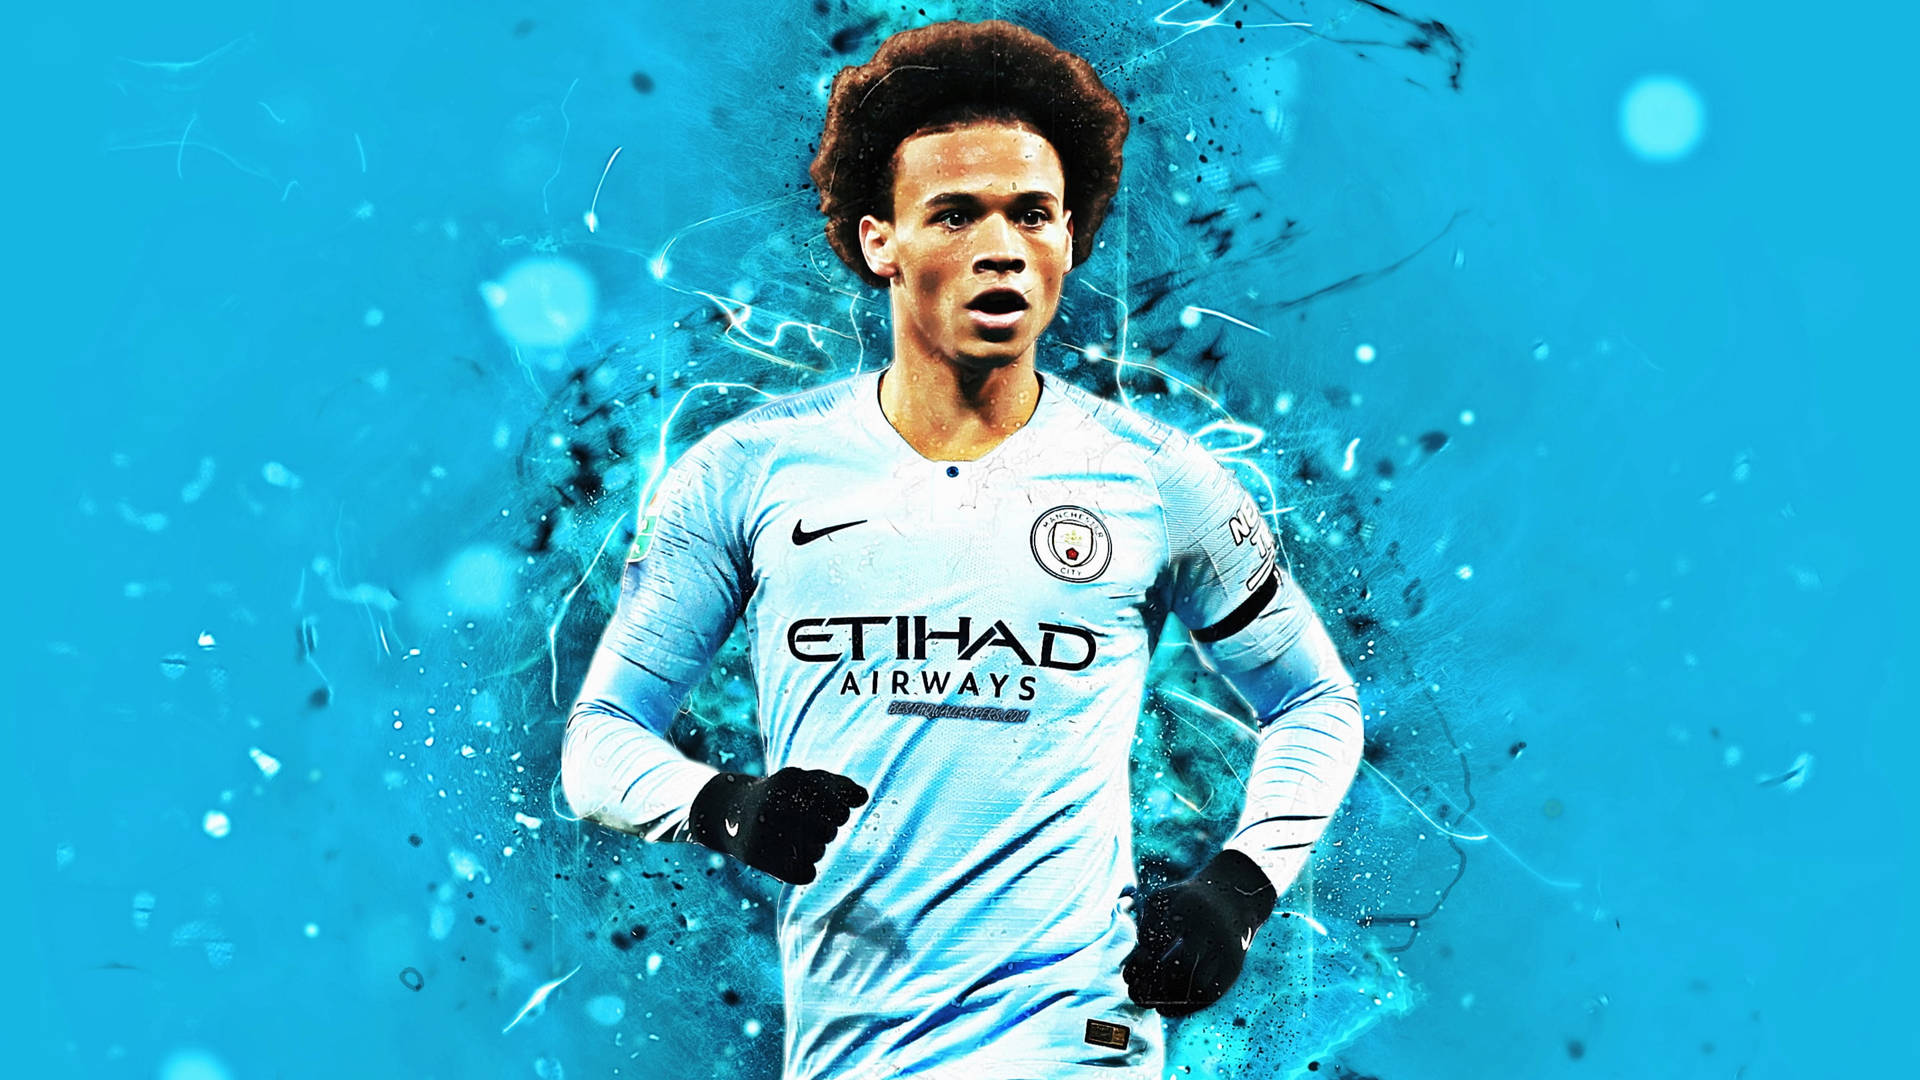 Man City's Leroy Sane Makes An Artistic Play For The Ball. Background